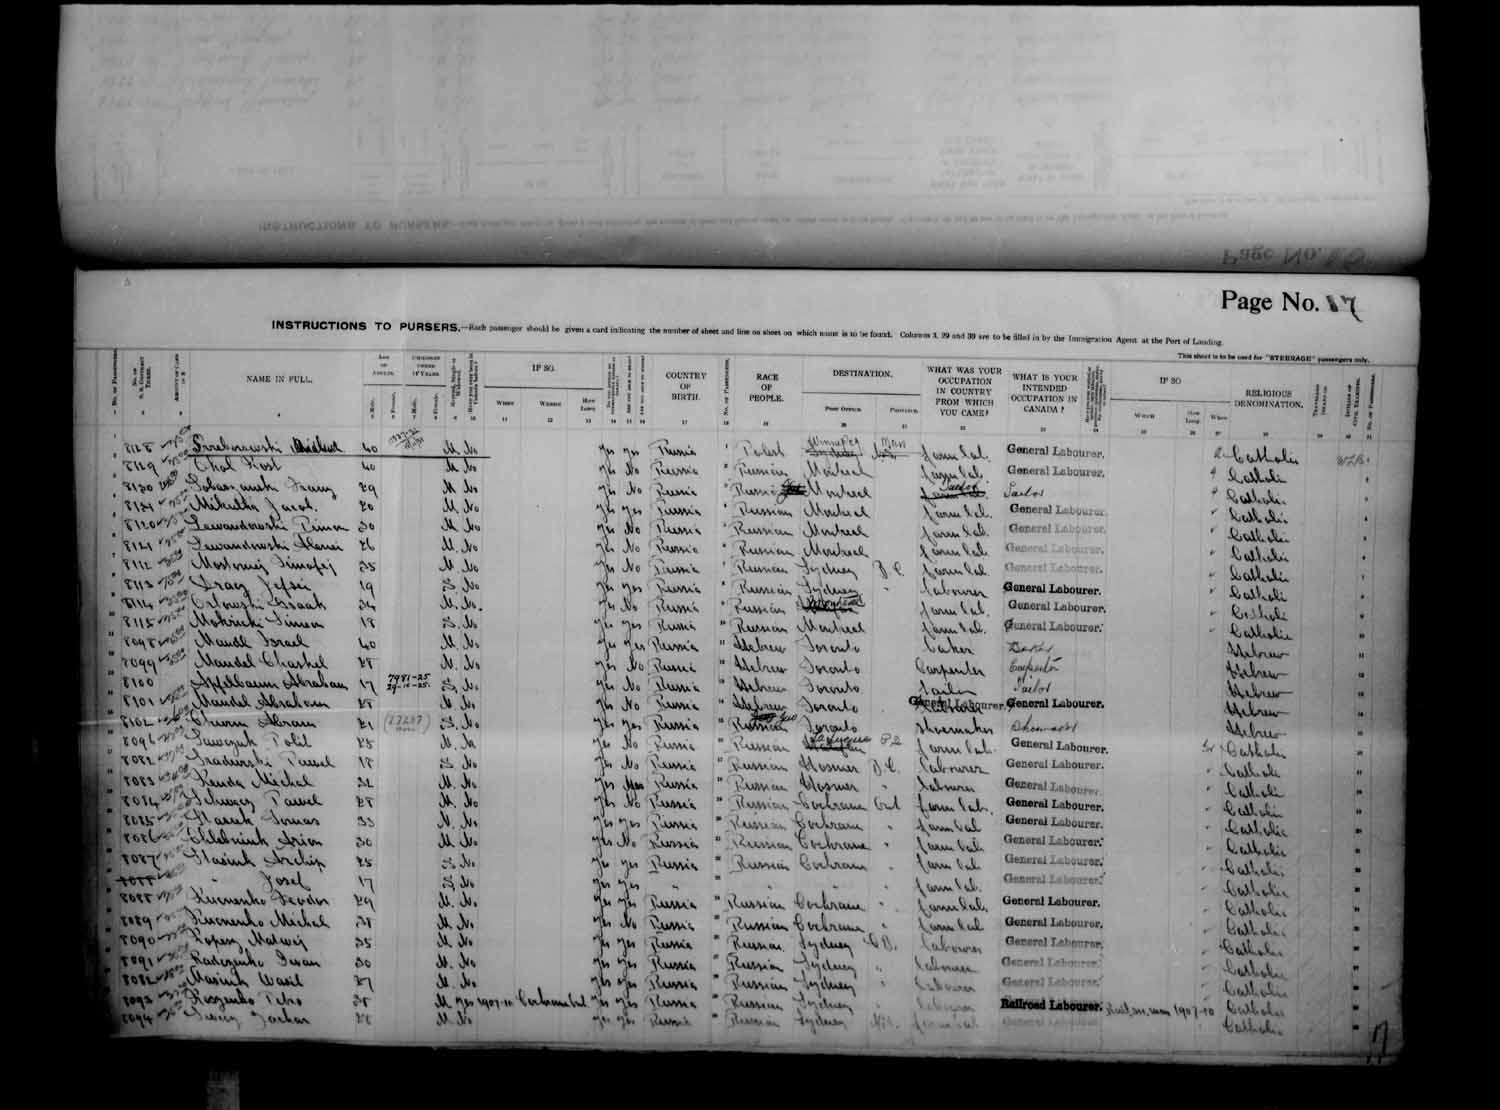 Digitized page of Passenger Lists for Image No.: e003686925